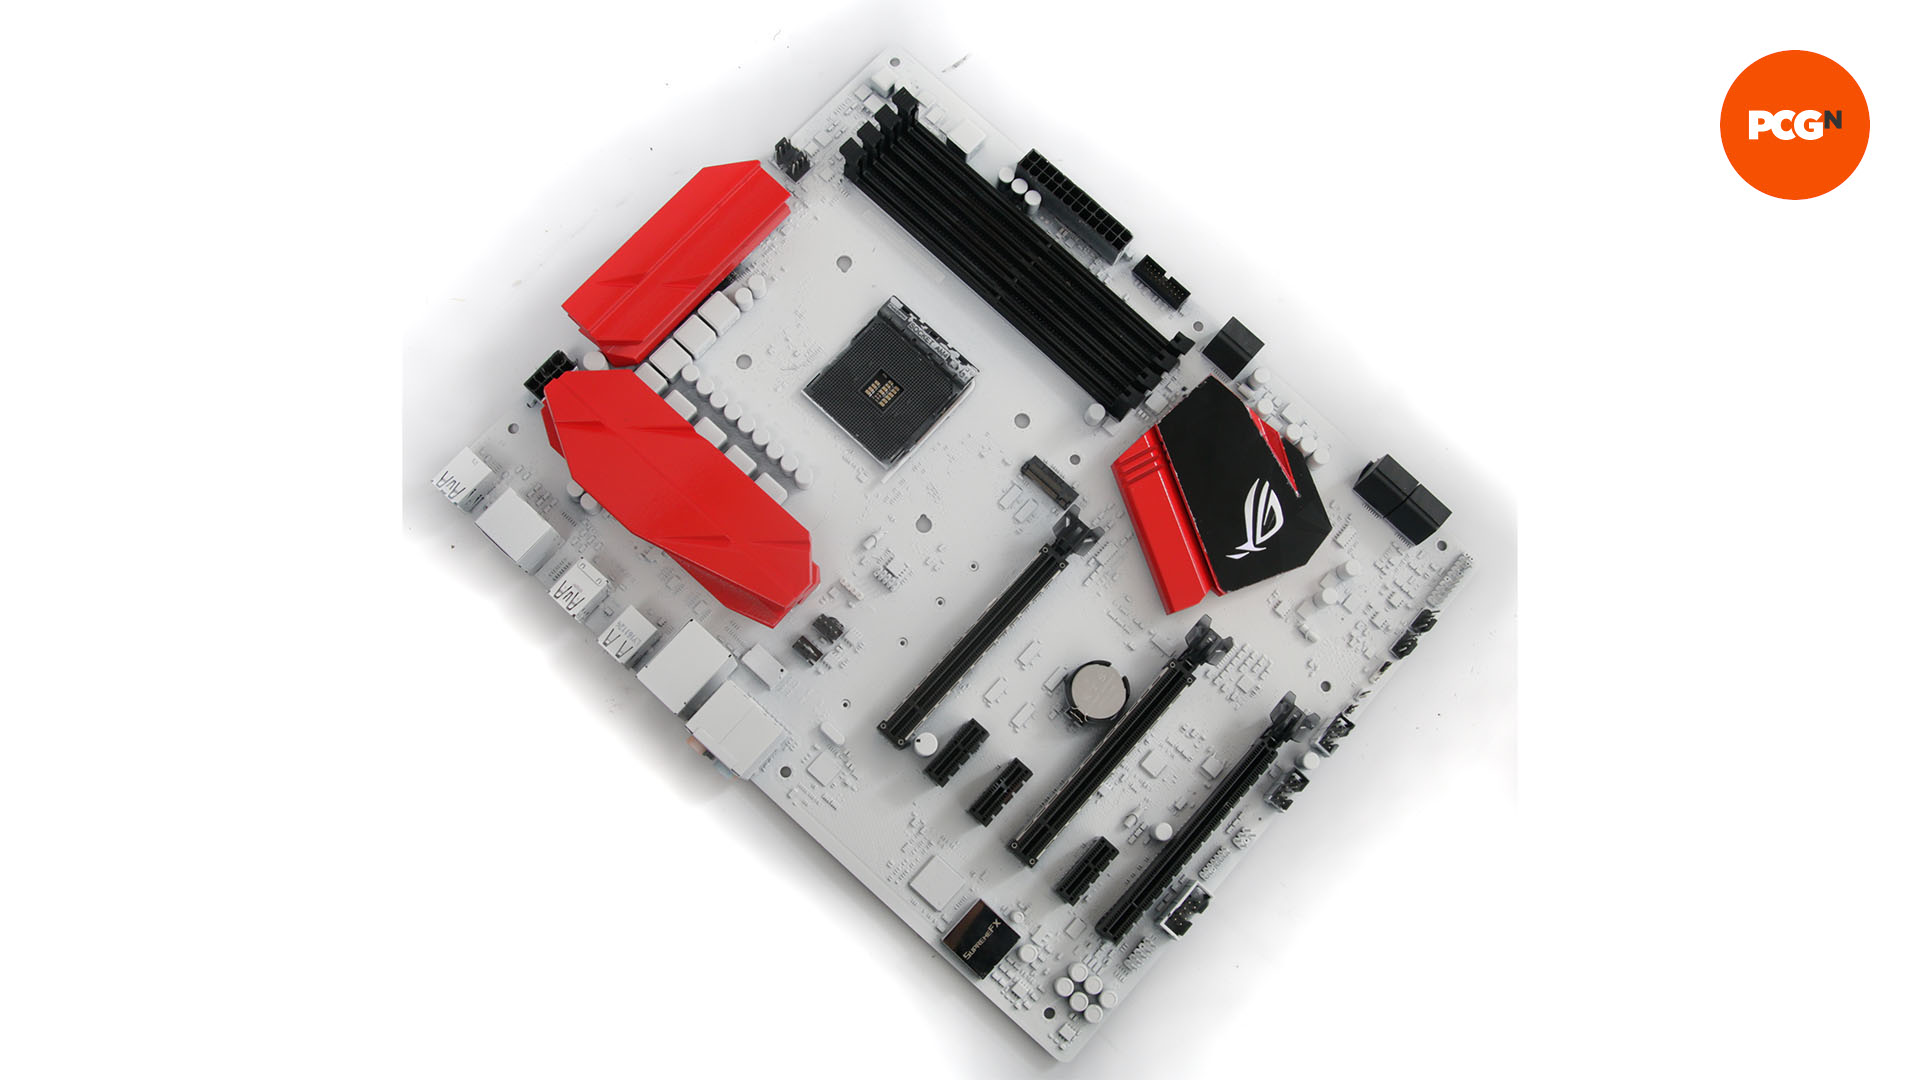 The painted motherboard is reassembled and is now black, red, and white